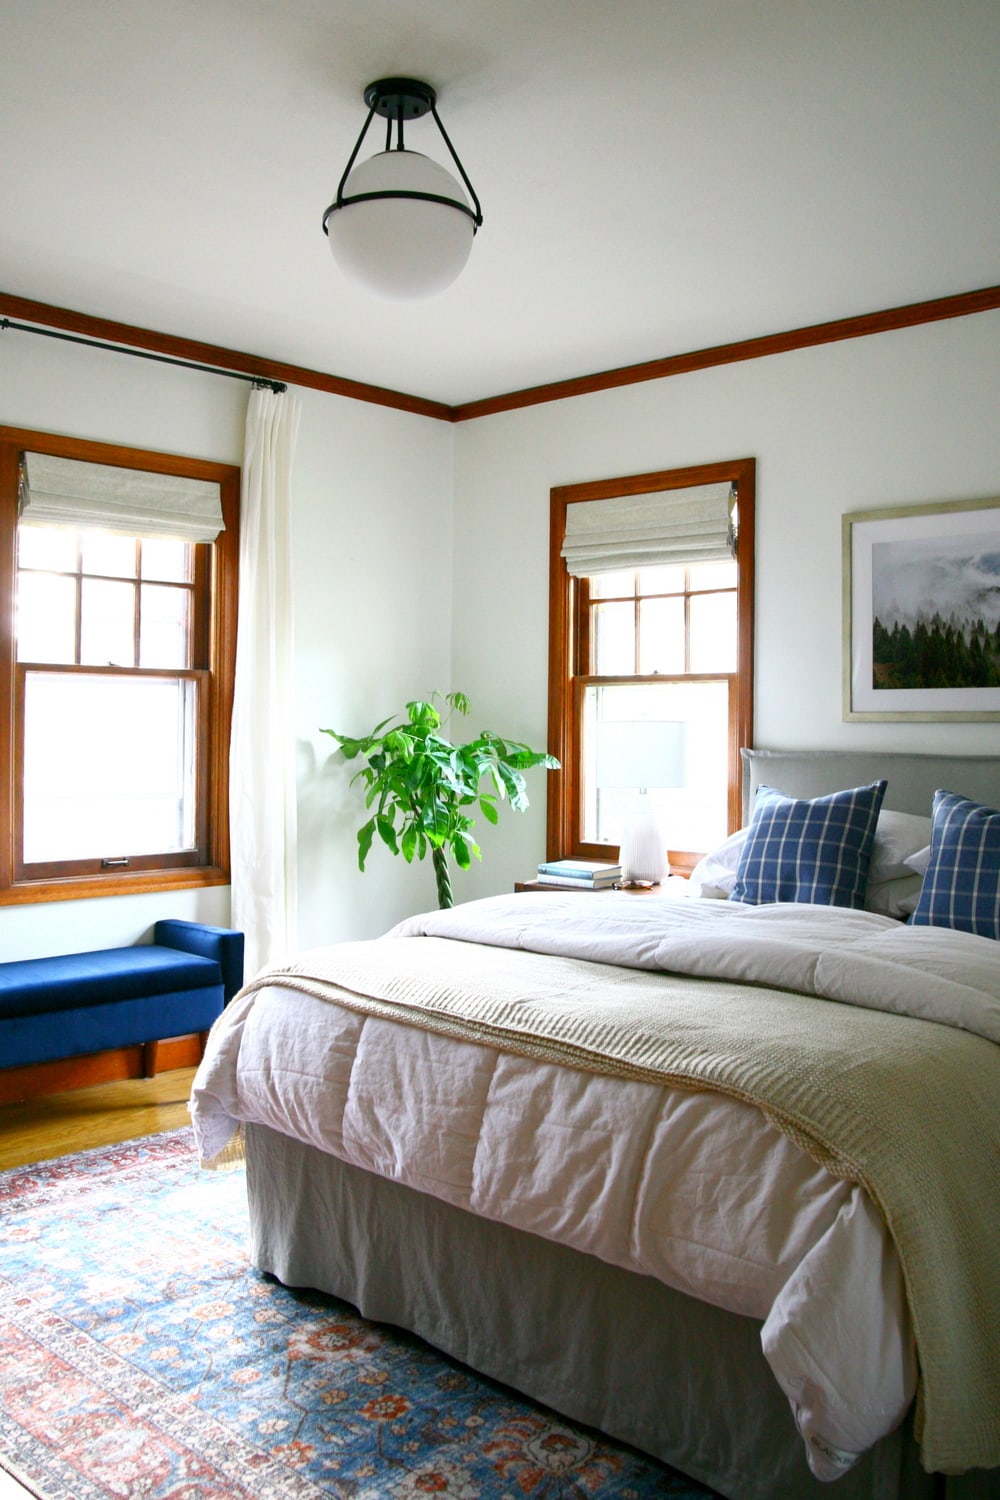 White walls in bedroom with bed to the right and a plant in the corner of the room.